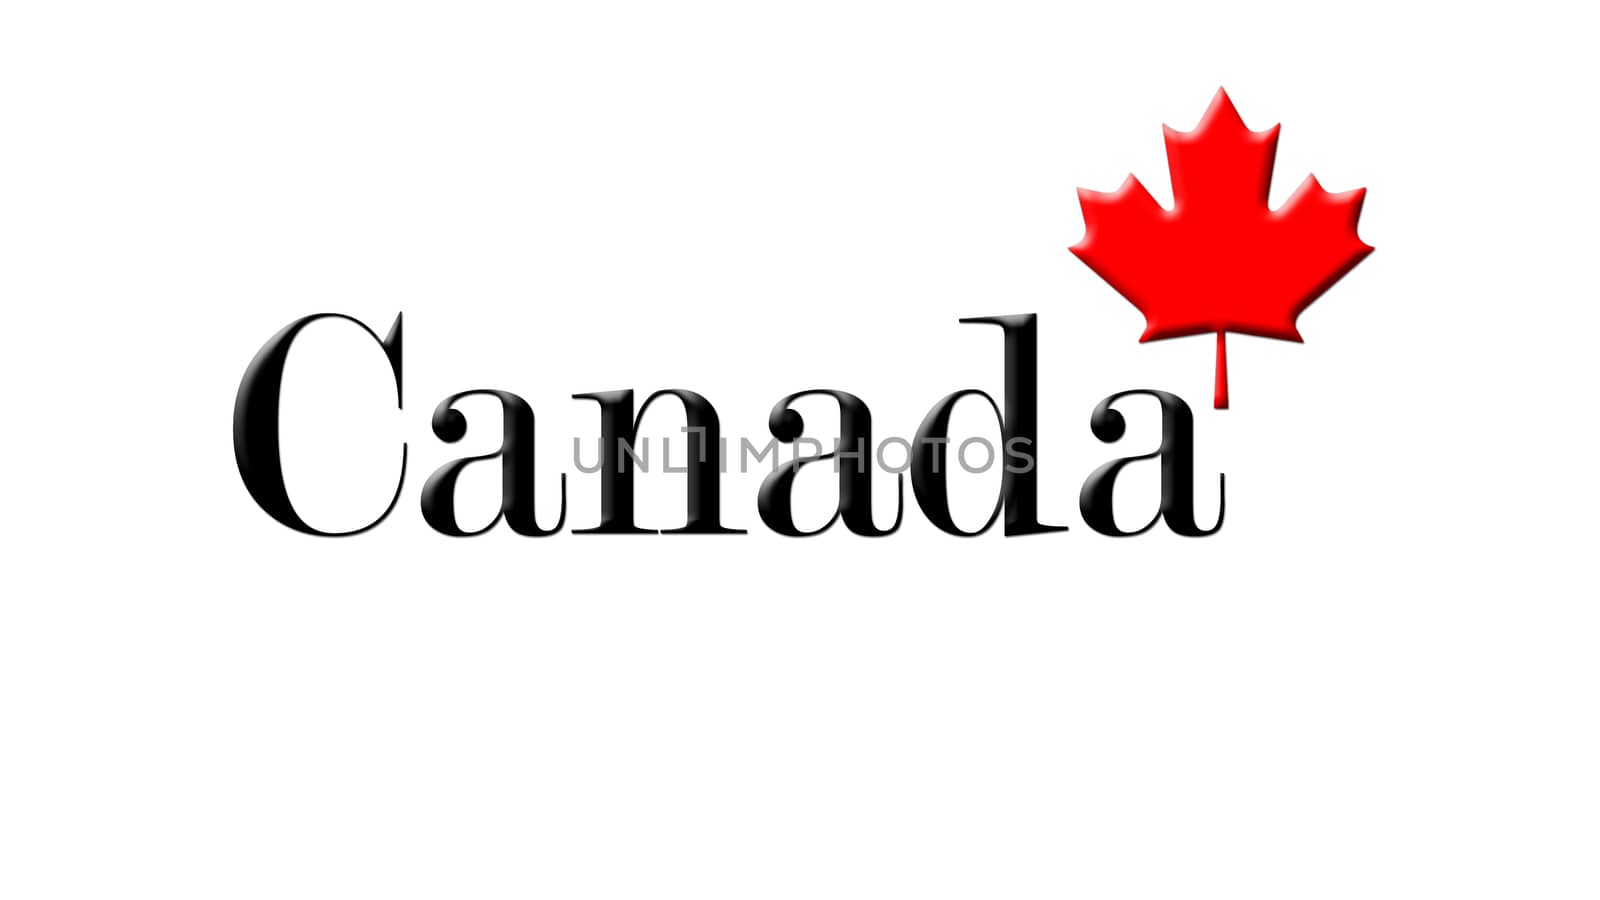 Canada Written On White Background With Maple Leaf 3D Rendering by alexandarilich